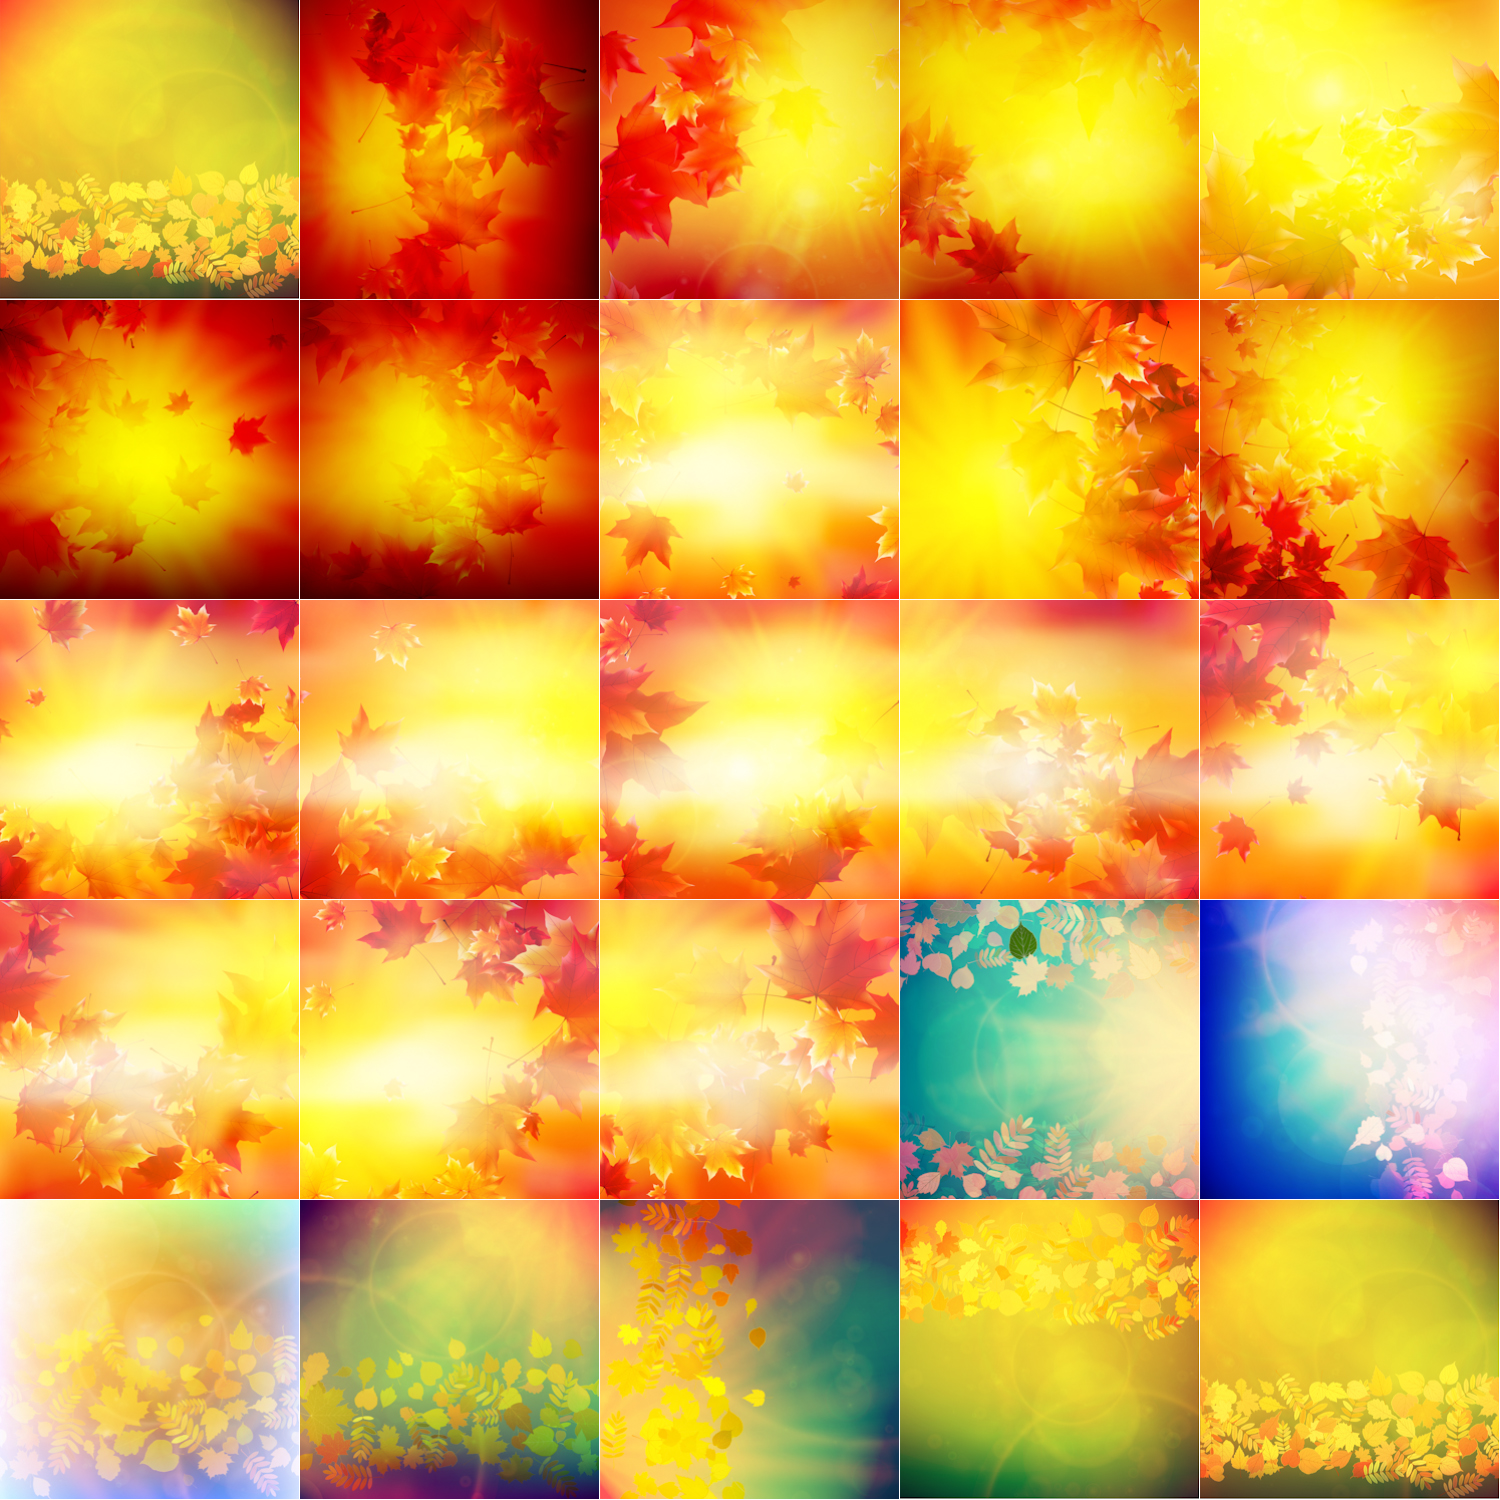 Beautiful and warm autumn backgrounds with leaves fall backgrounds with reflection from the sun